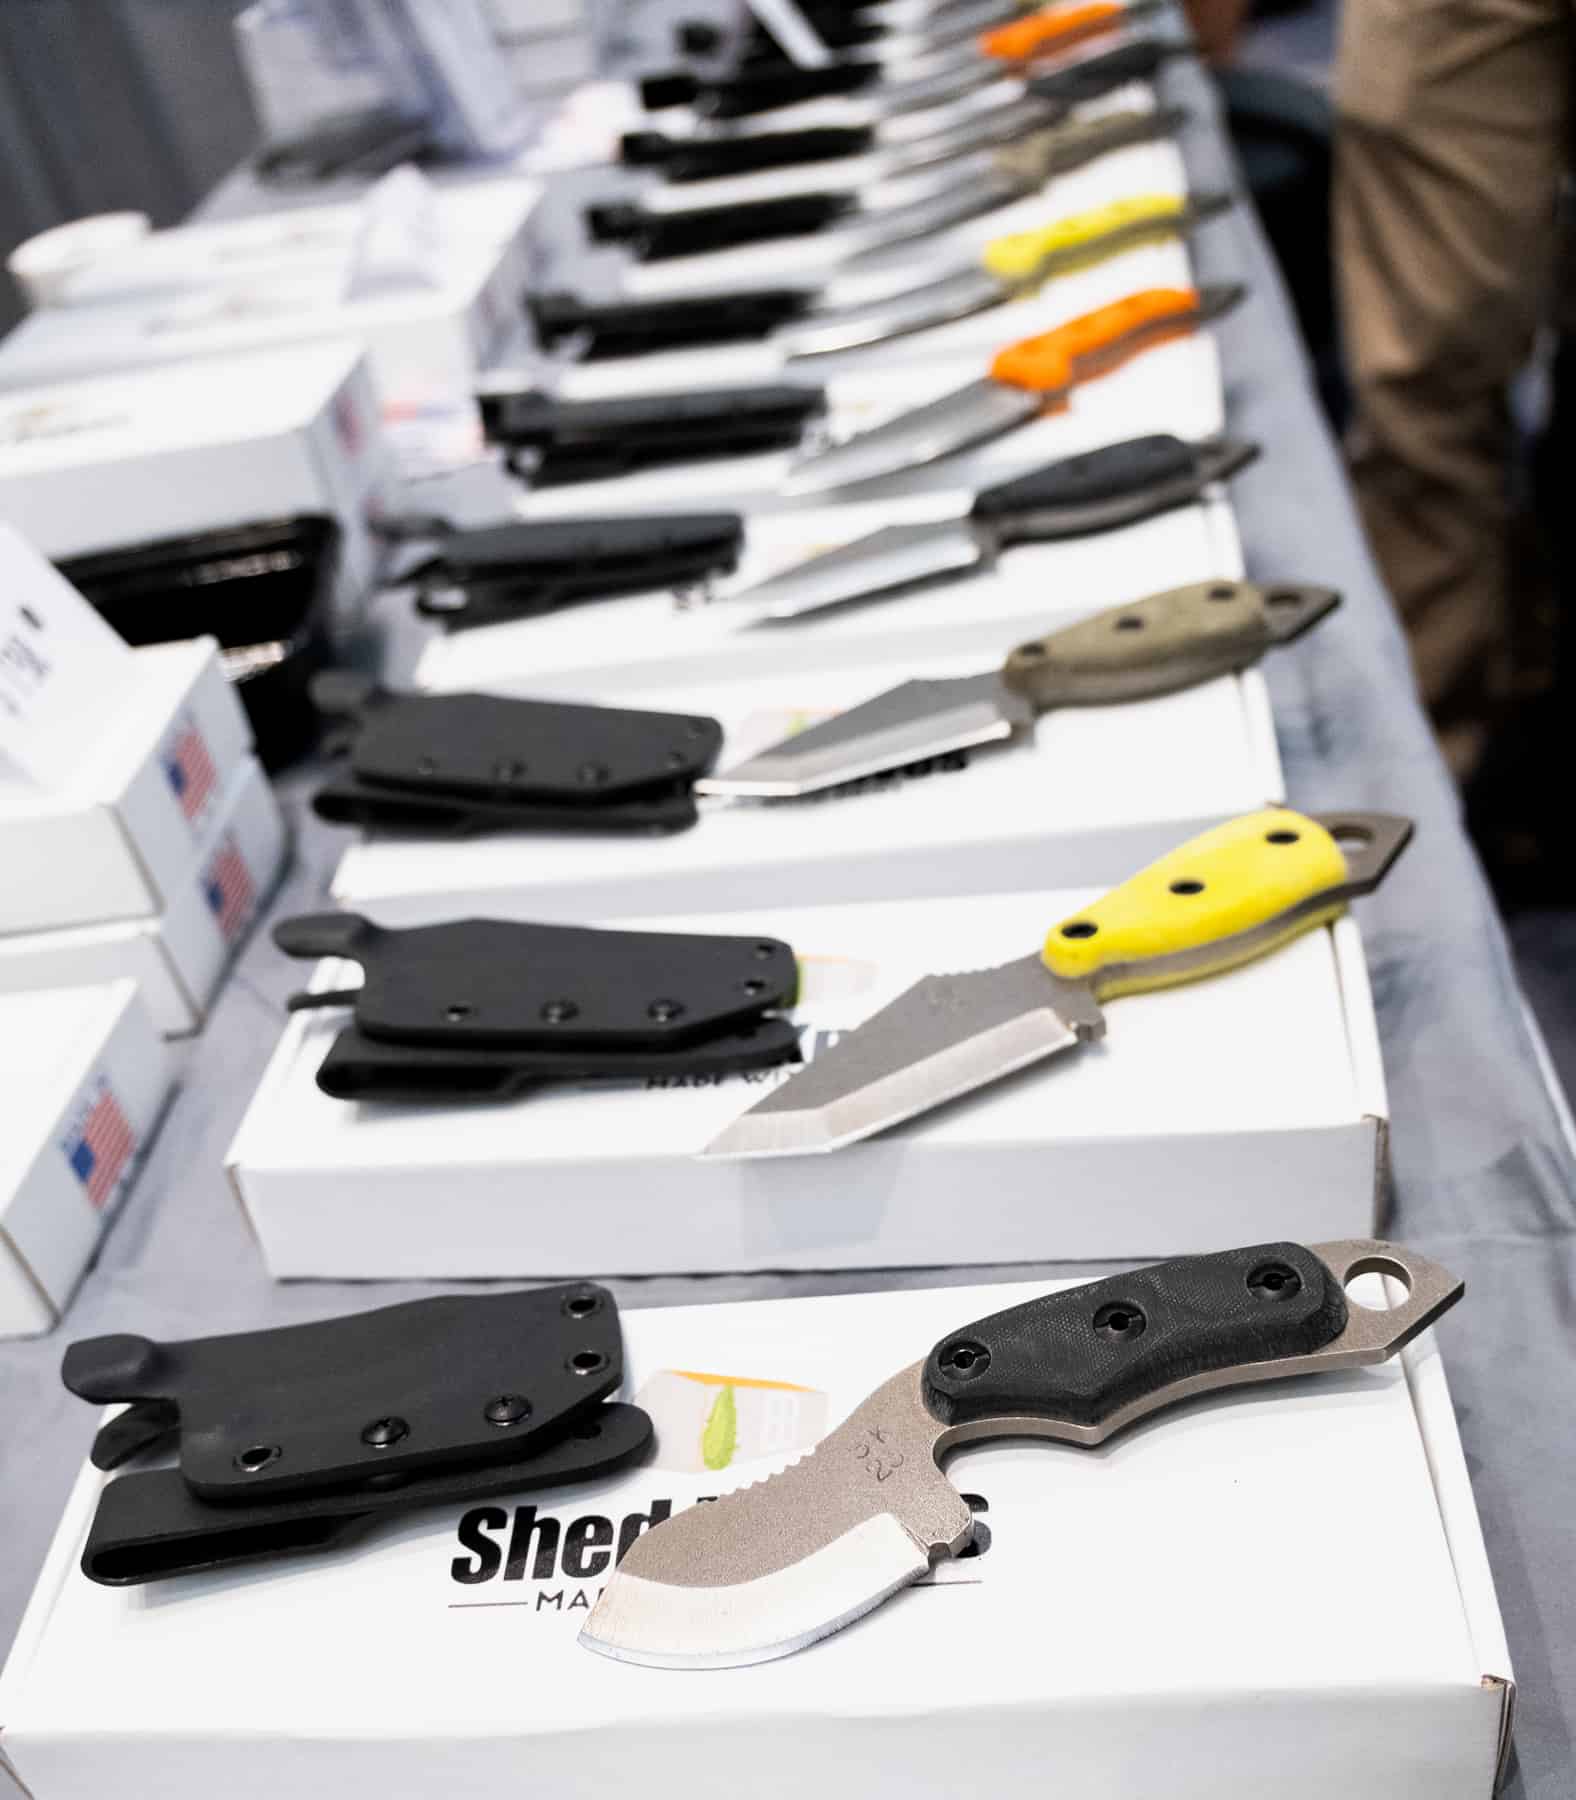 Shed Knives at Blade Show 2023.